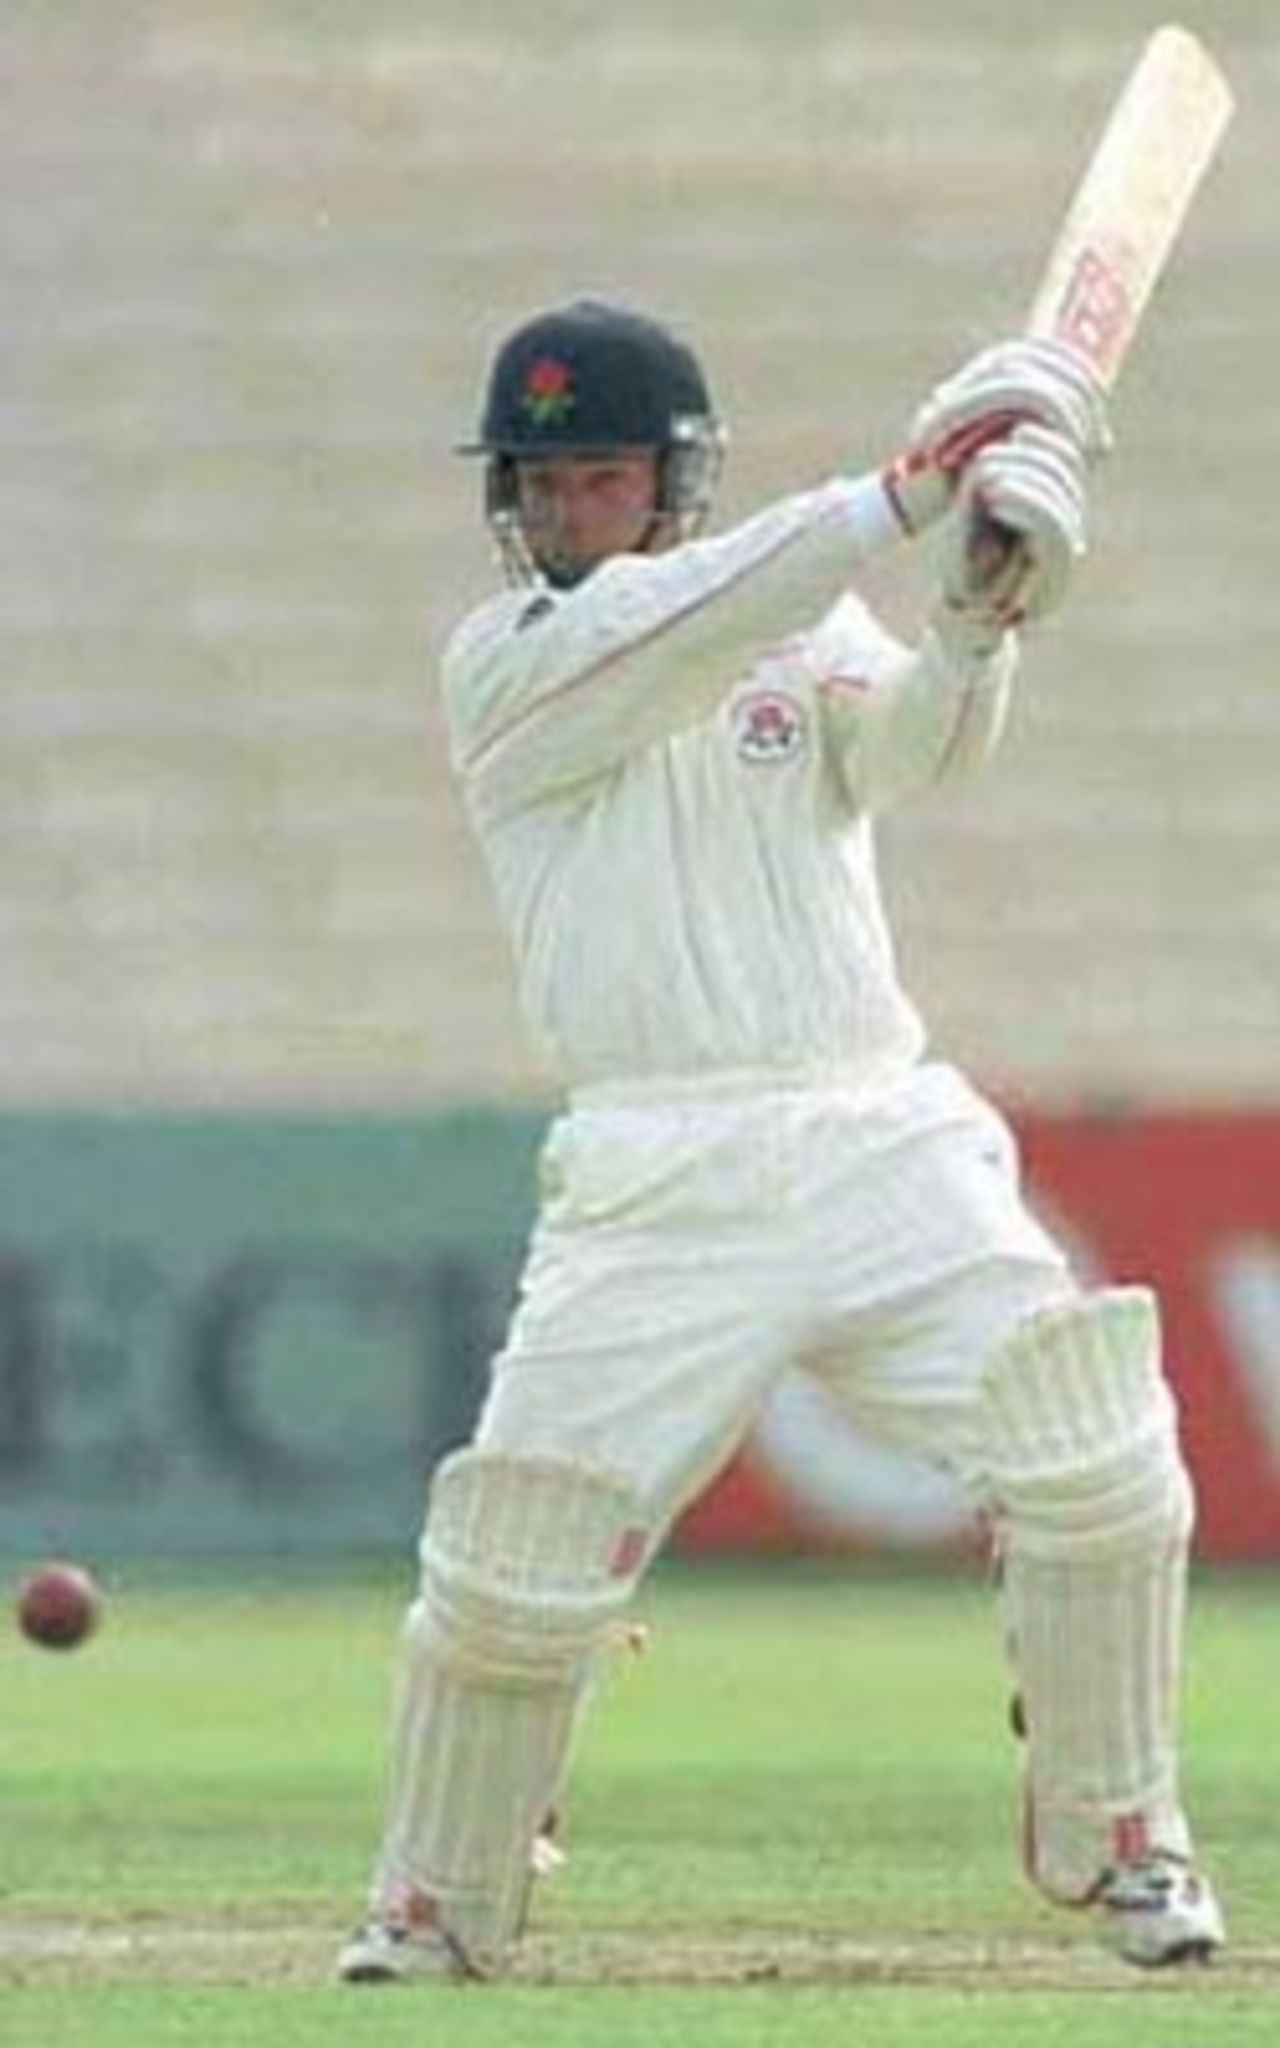 Graham Lloyd cover drives, PPP healthcare County Championship Division One, 2000, Lancashire v Somerset, Old Trafford, Manchester, 08-10 September 2000 (Day 2).